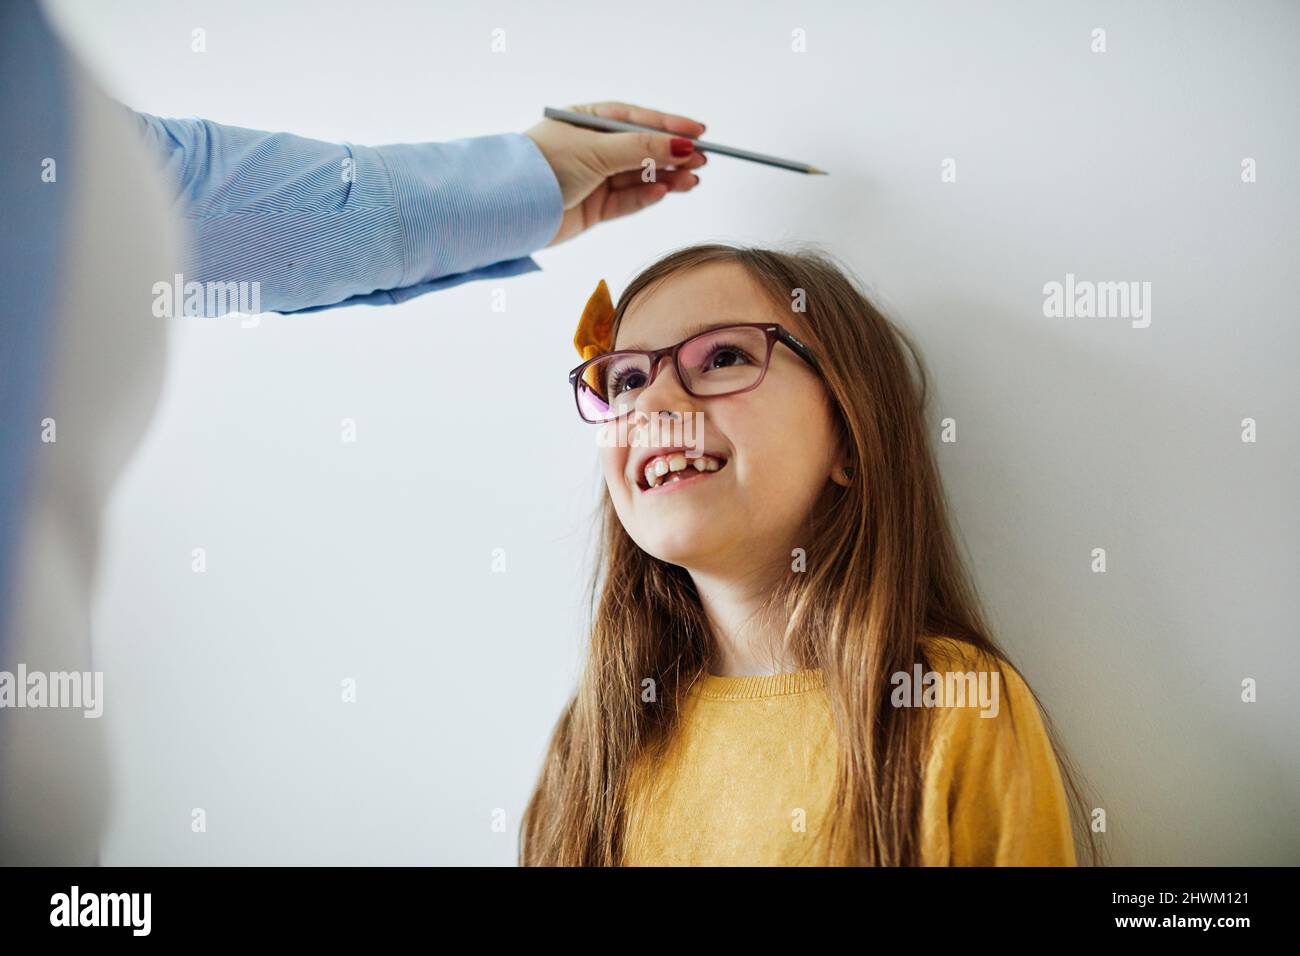 daughter mother measuring height growth childhood tall child heigth kid wall cute Stock Photo